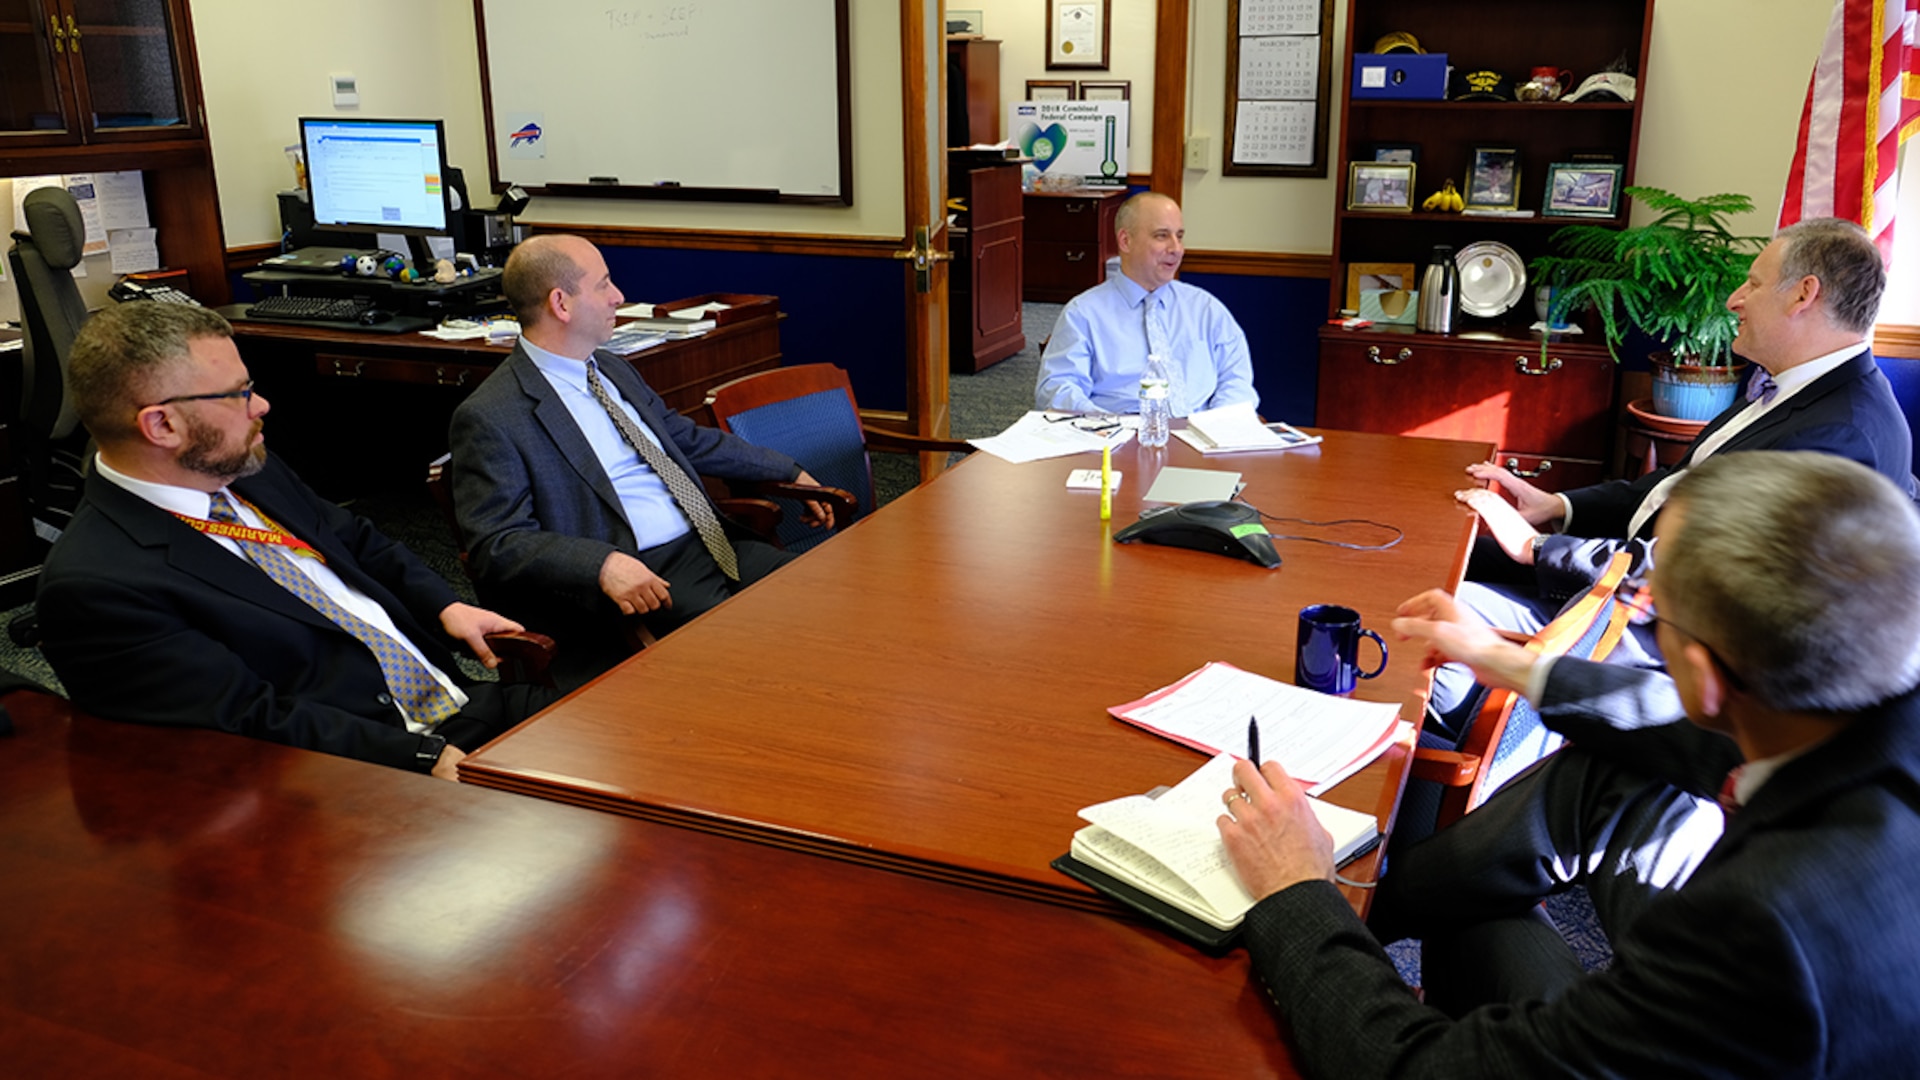 Dr. Steven Spear (back right), author of the best-selling book “The High-Velocity Edge,” talks to Larry Tarasek (center), technical director for Naval Surface Warfare Center, Carderock Division in West Bethesda, Md., on Feb. 14, 2019, as Lou Carl, Carderock’s chief engineer (front right), looks on. Brian Tammaro (left) and Dr. Tom Marino, both of Carderock’s Corporate Business Office, organized the event with Spear as part of the Industrial Liaison Program with the Massachusetts Institute of Technology, a partnership that allows the two organizations to share resources. (U.S. Navy photo by Kelley Stirling/Released)